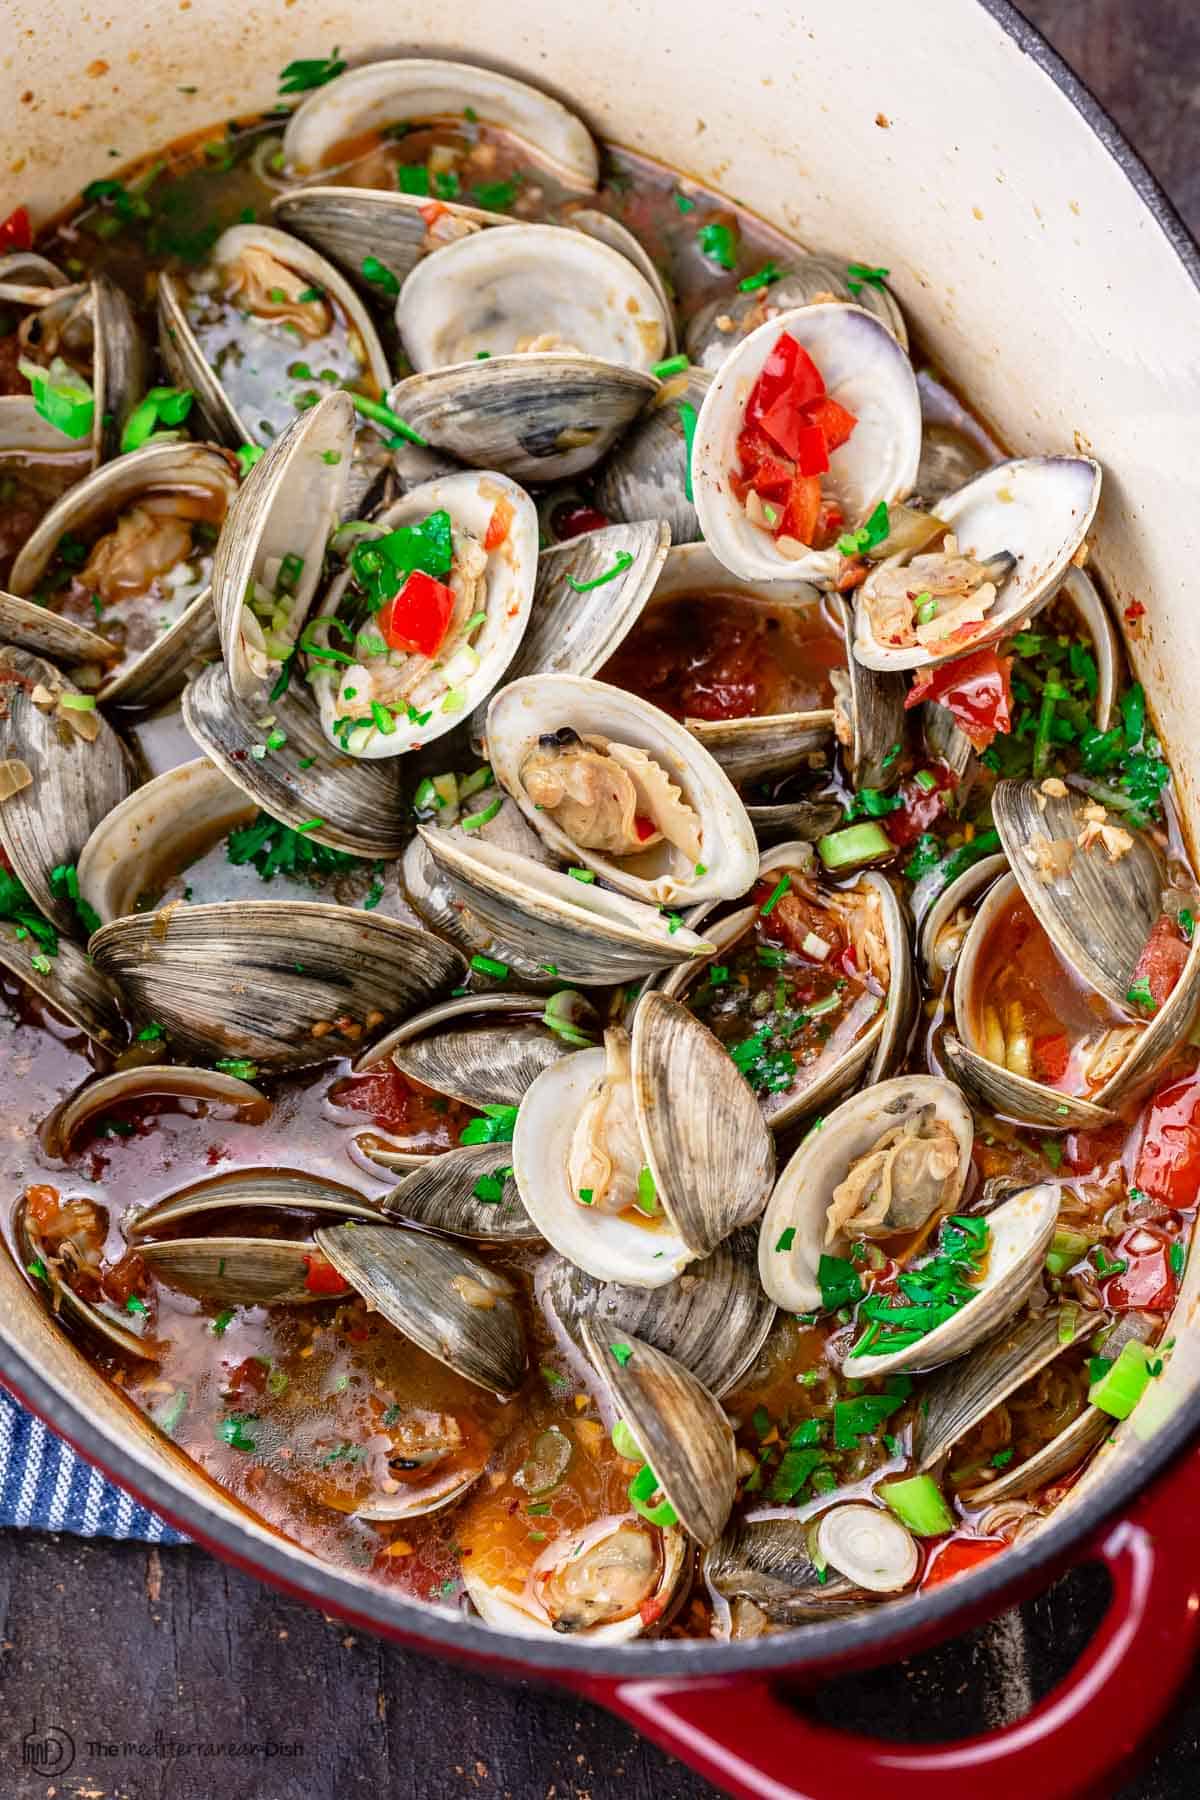 Mediterranean-Style Steamed Clams - How to Cook Clams